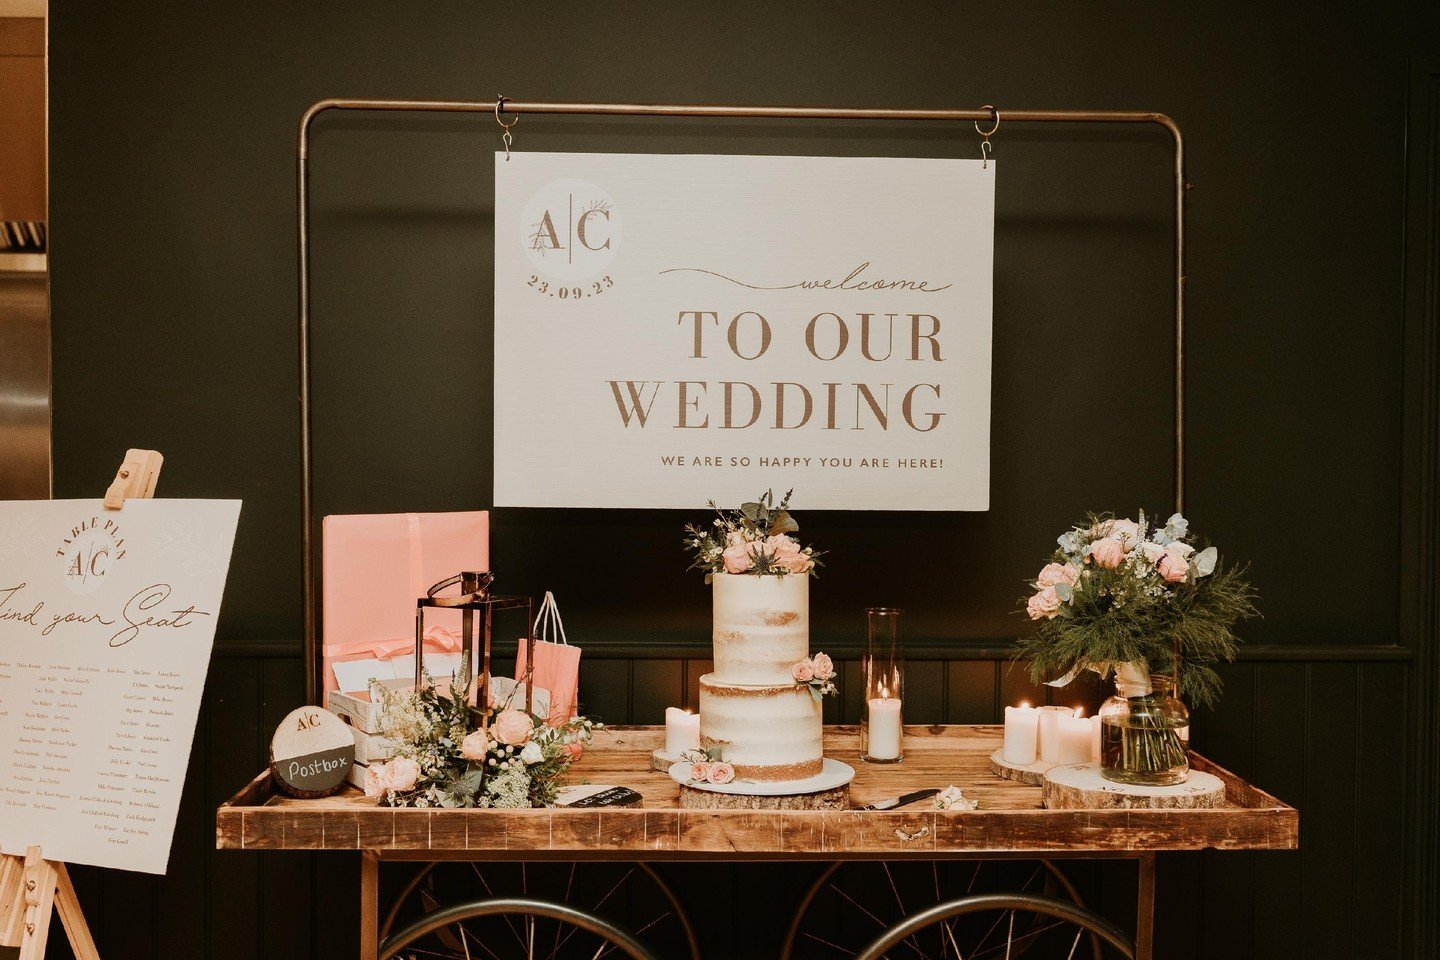 We're here for statement cake tables!

Captured by @photographybybethwilson

#watersedge #cotswoldwedding #cotswoldbride #luxurybride #gloucestershirevenue #gloucestershirewedding